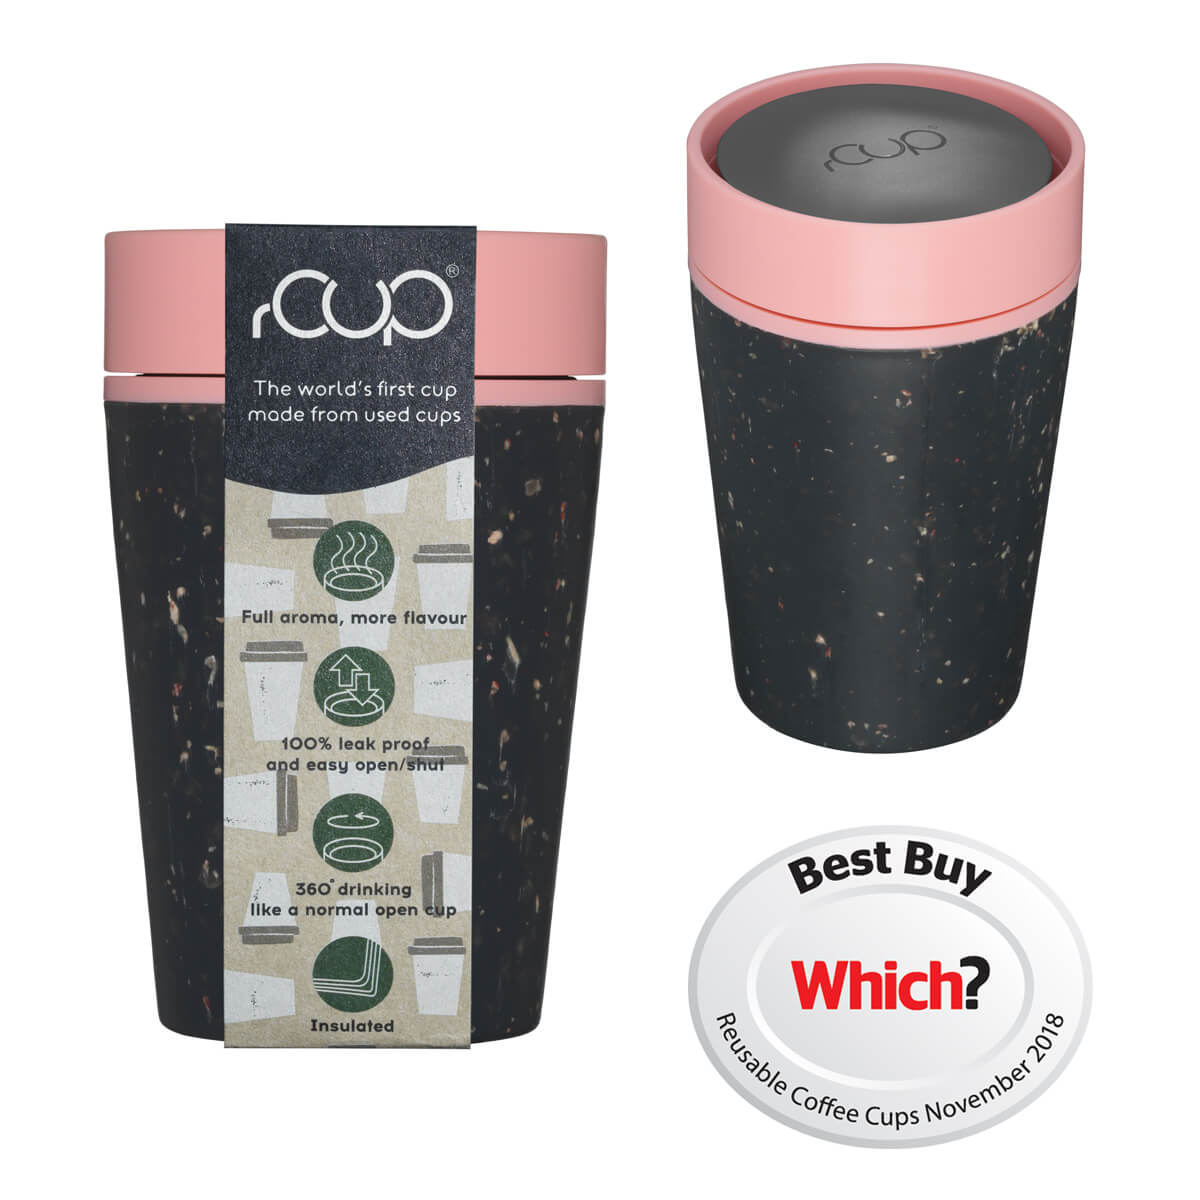 rCUP eco-friendly reusable coffee cup in black and pink